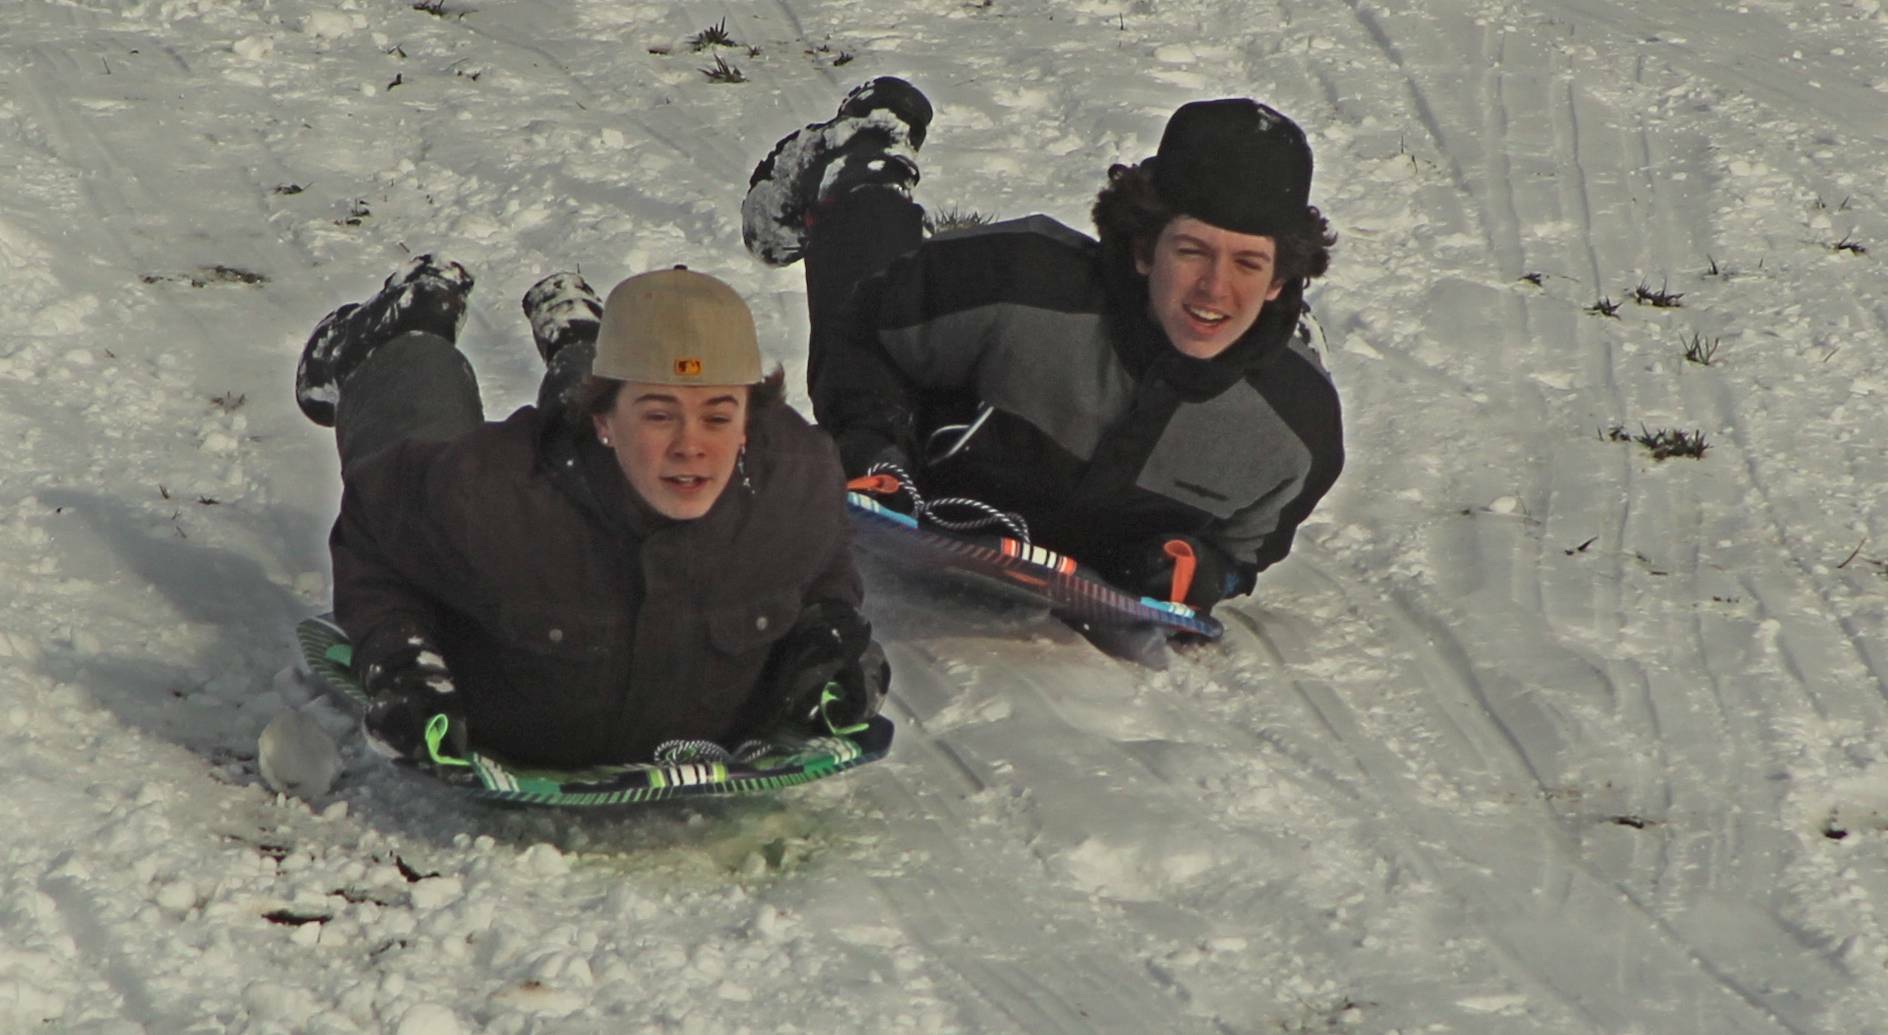 Photo by Karina Andrew/Whidbey News-Times
Oak Harbor High School sophomores Jayson Champignon, left, and Brayden Rupp race downhill on sleds.